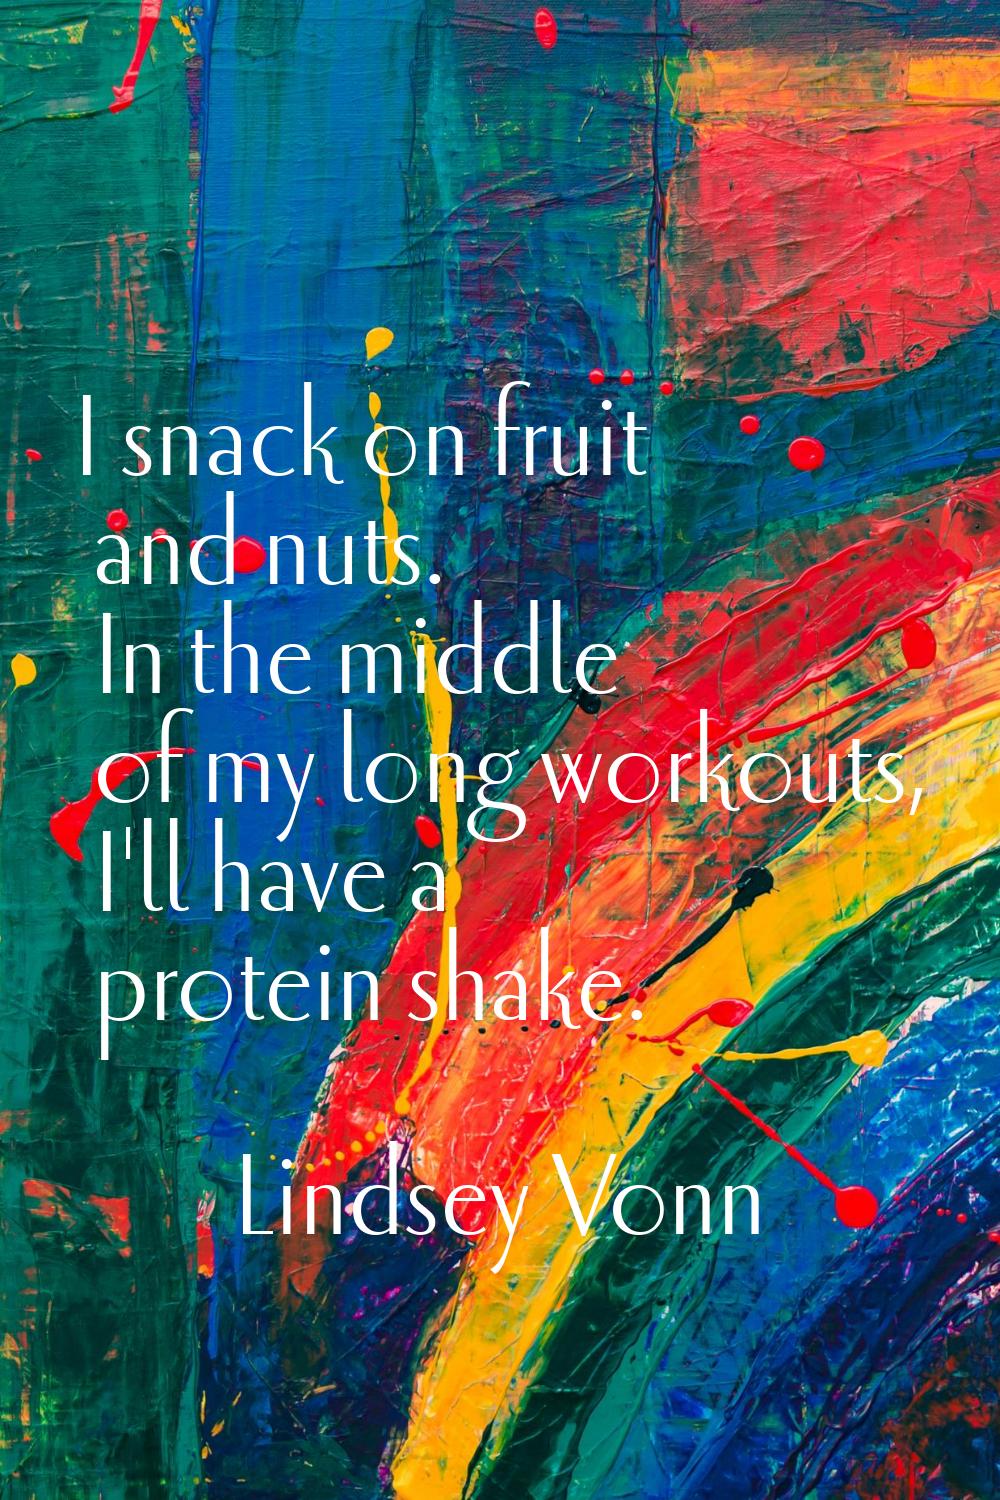 I snack on fruit and nuts. In the middle of my long workouts, I'll have a protein shake.